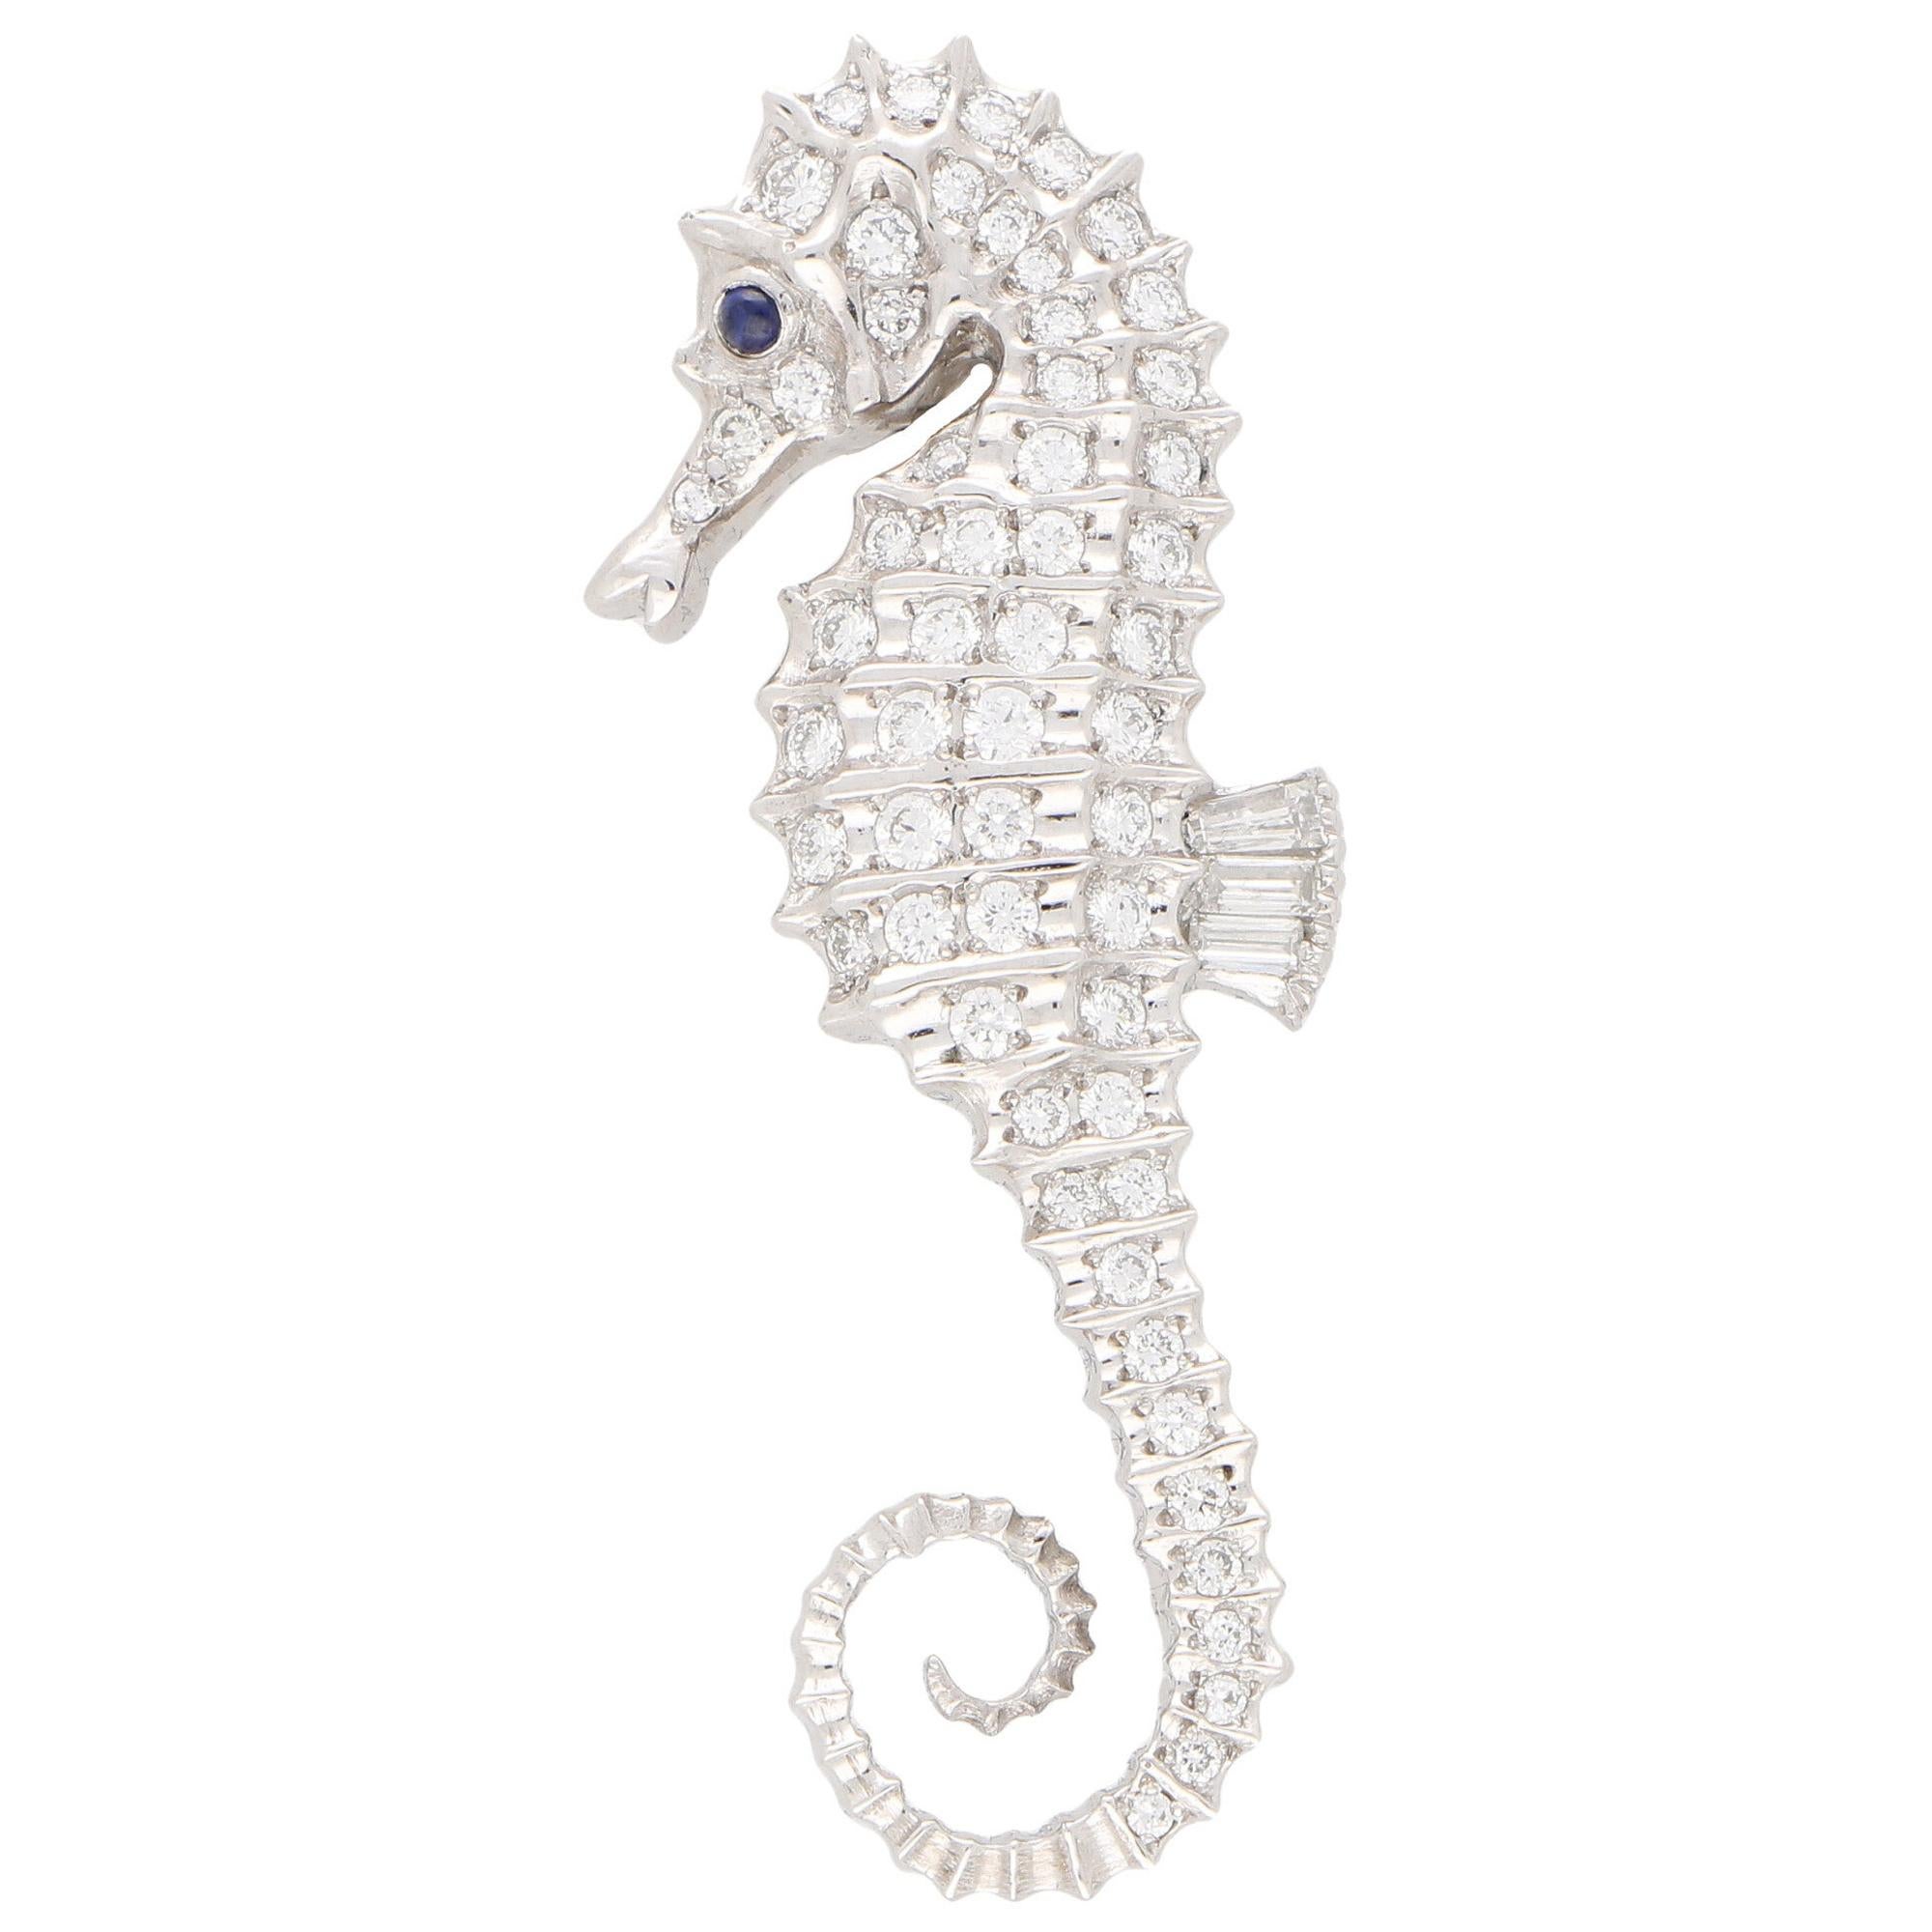 Diamond and Sapphire Seahorse Pin Brooch Set in Platinum